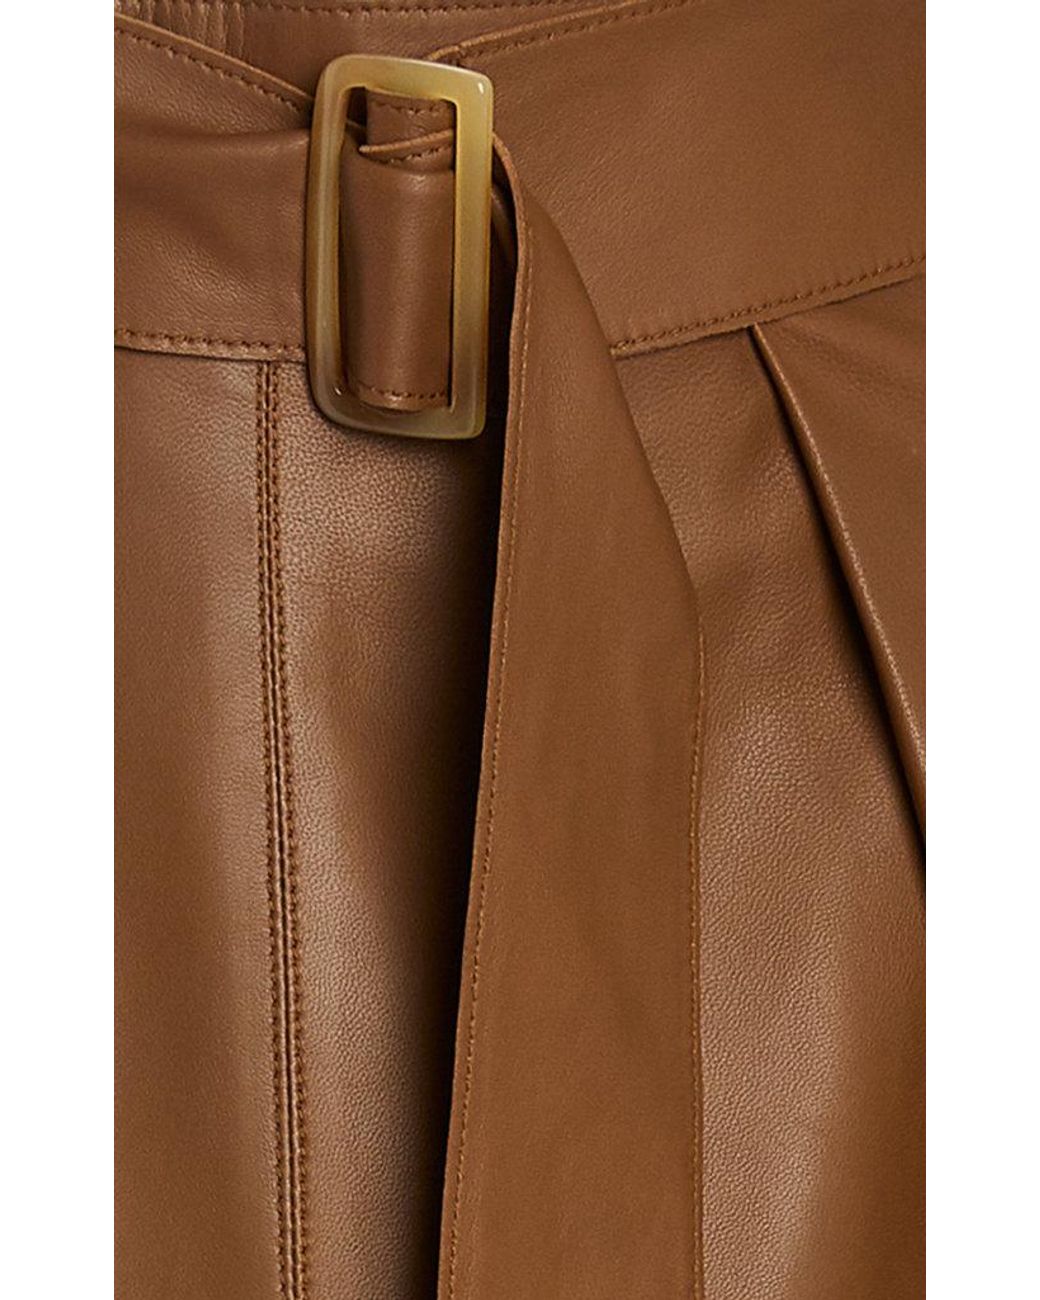 Vince Belted Leather Skirt in Brown